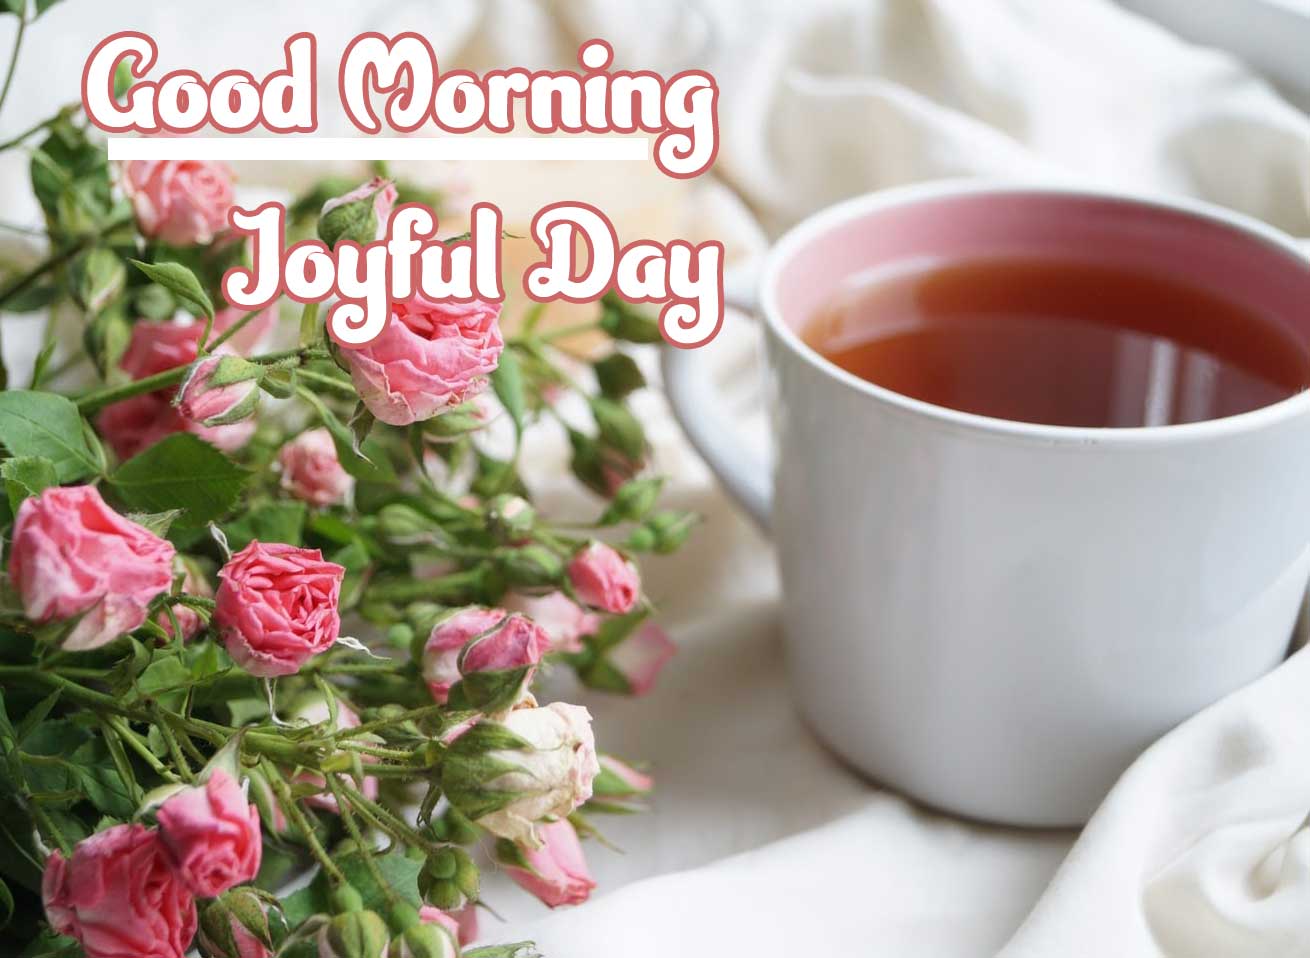 Good Morning Wishes Images 4K 1080p Wallpaper Free Download 